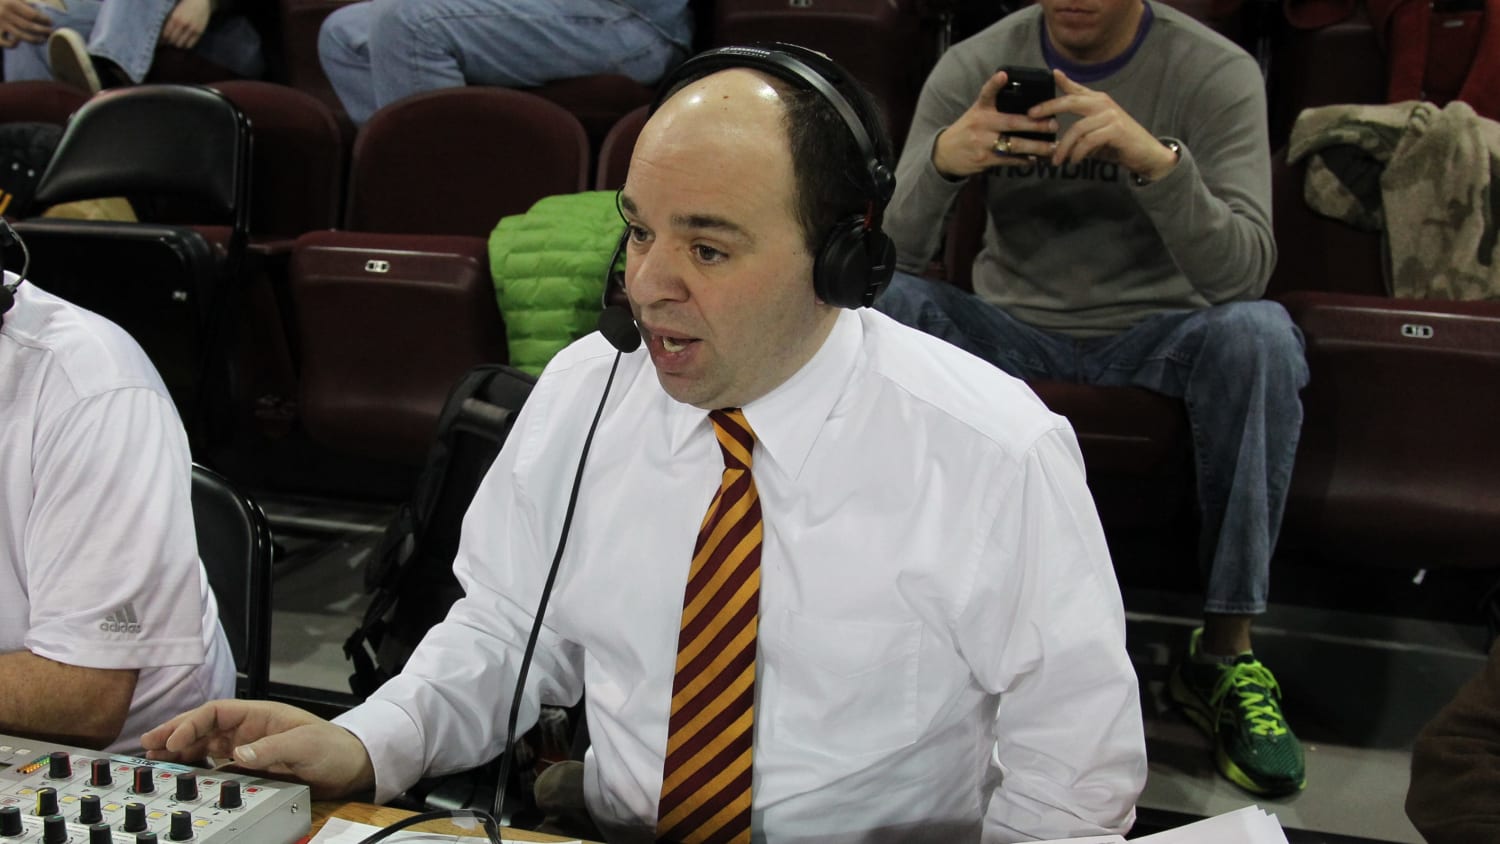 Don Chiodo, beloved Central Michigan play-by-play broadcaster, dies in car crash